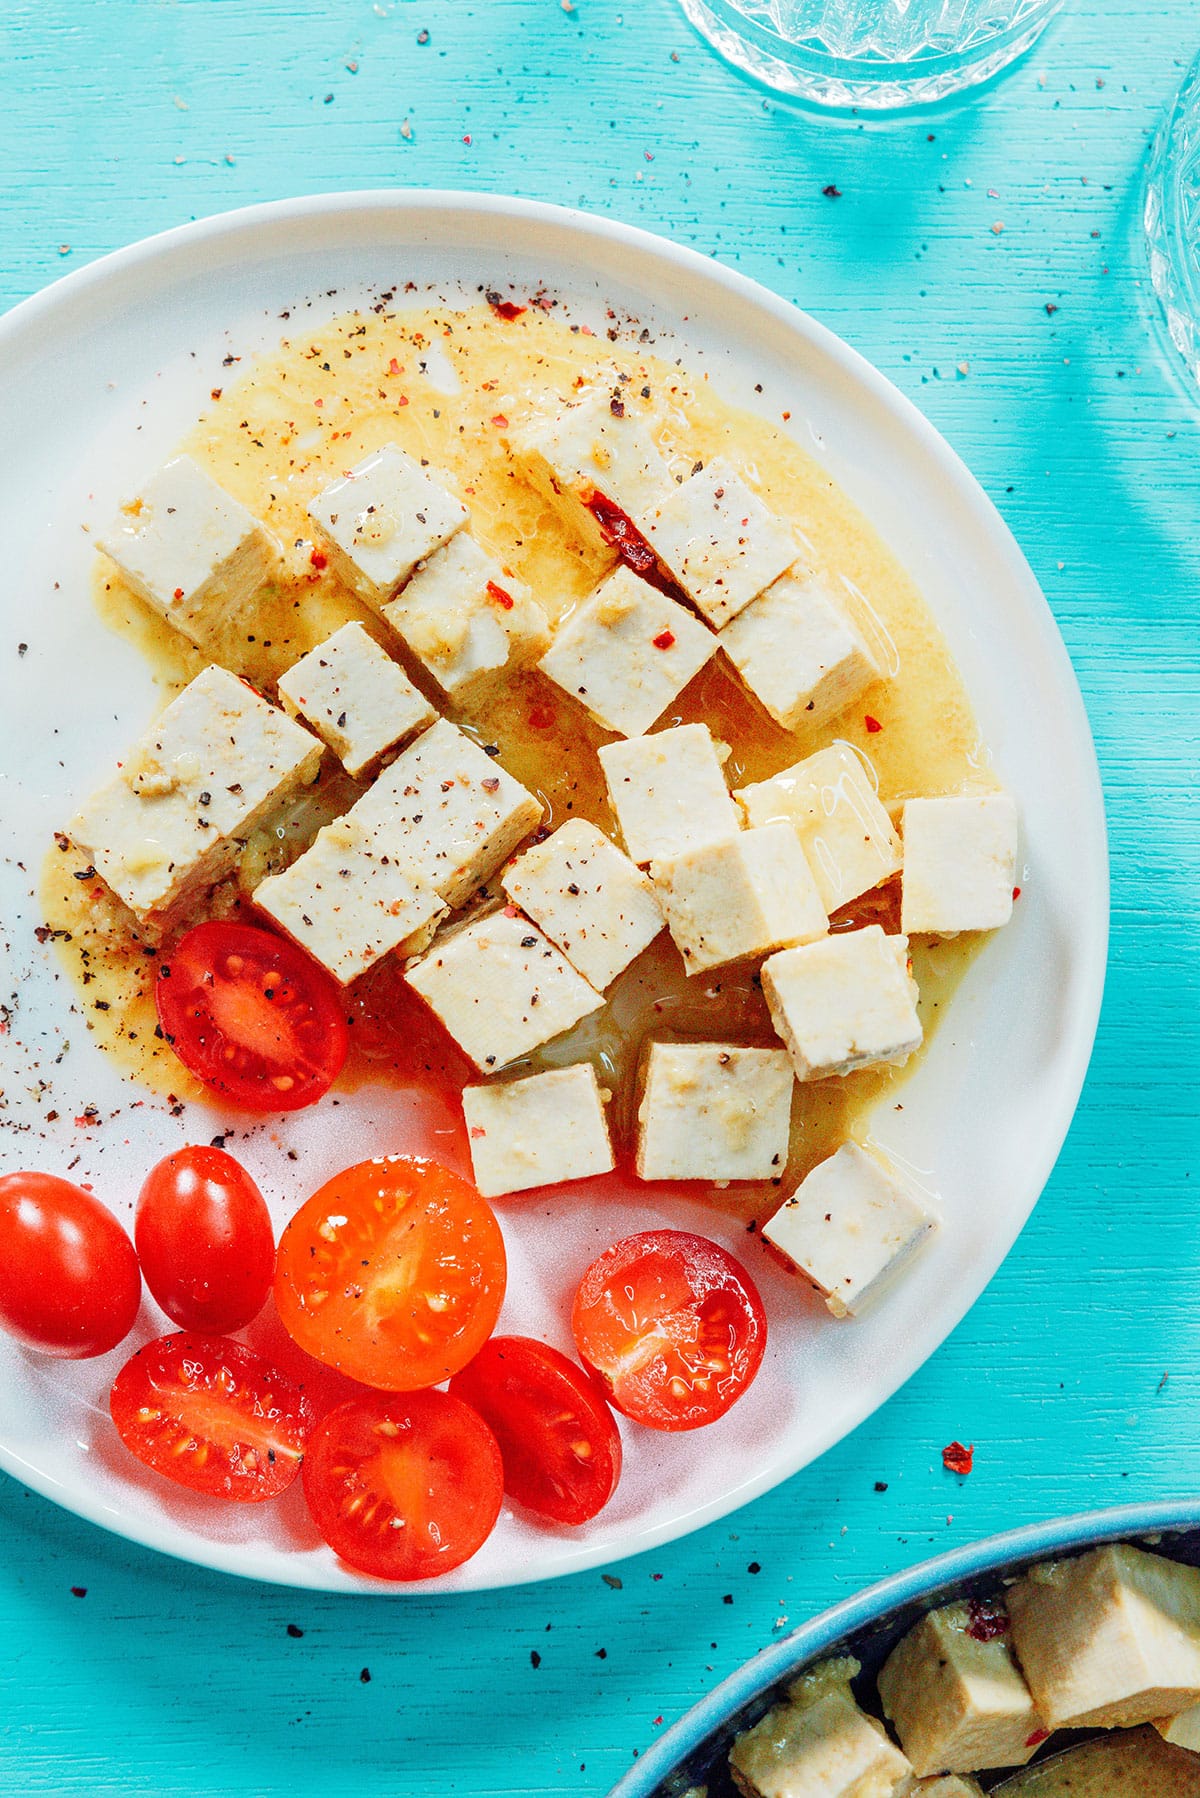 Vegan feta on a plate next to tomatoes.